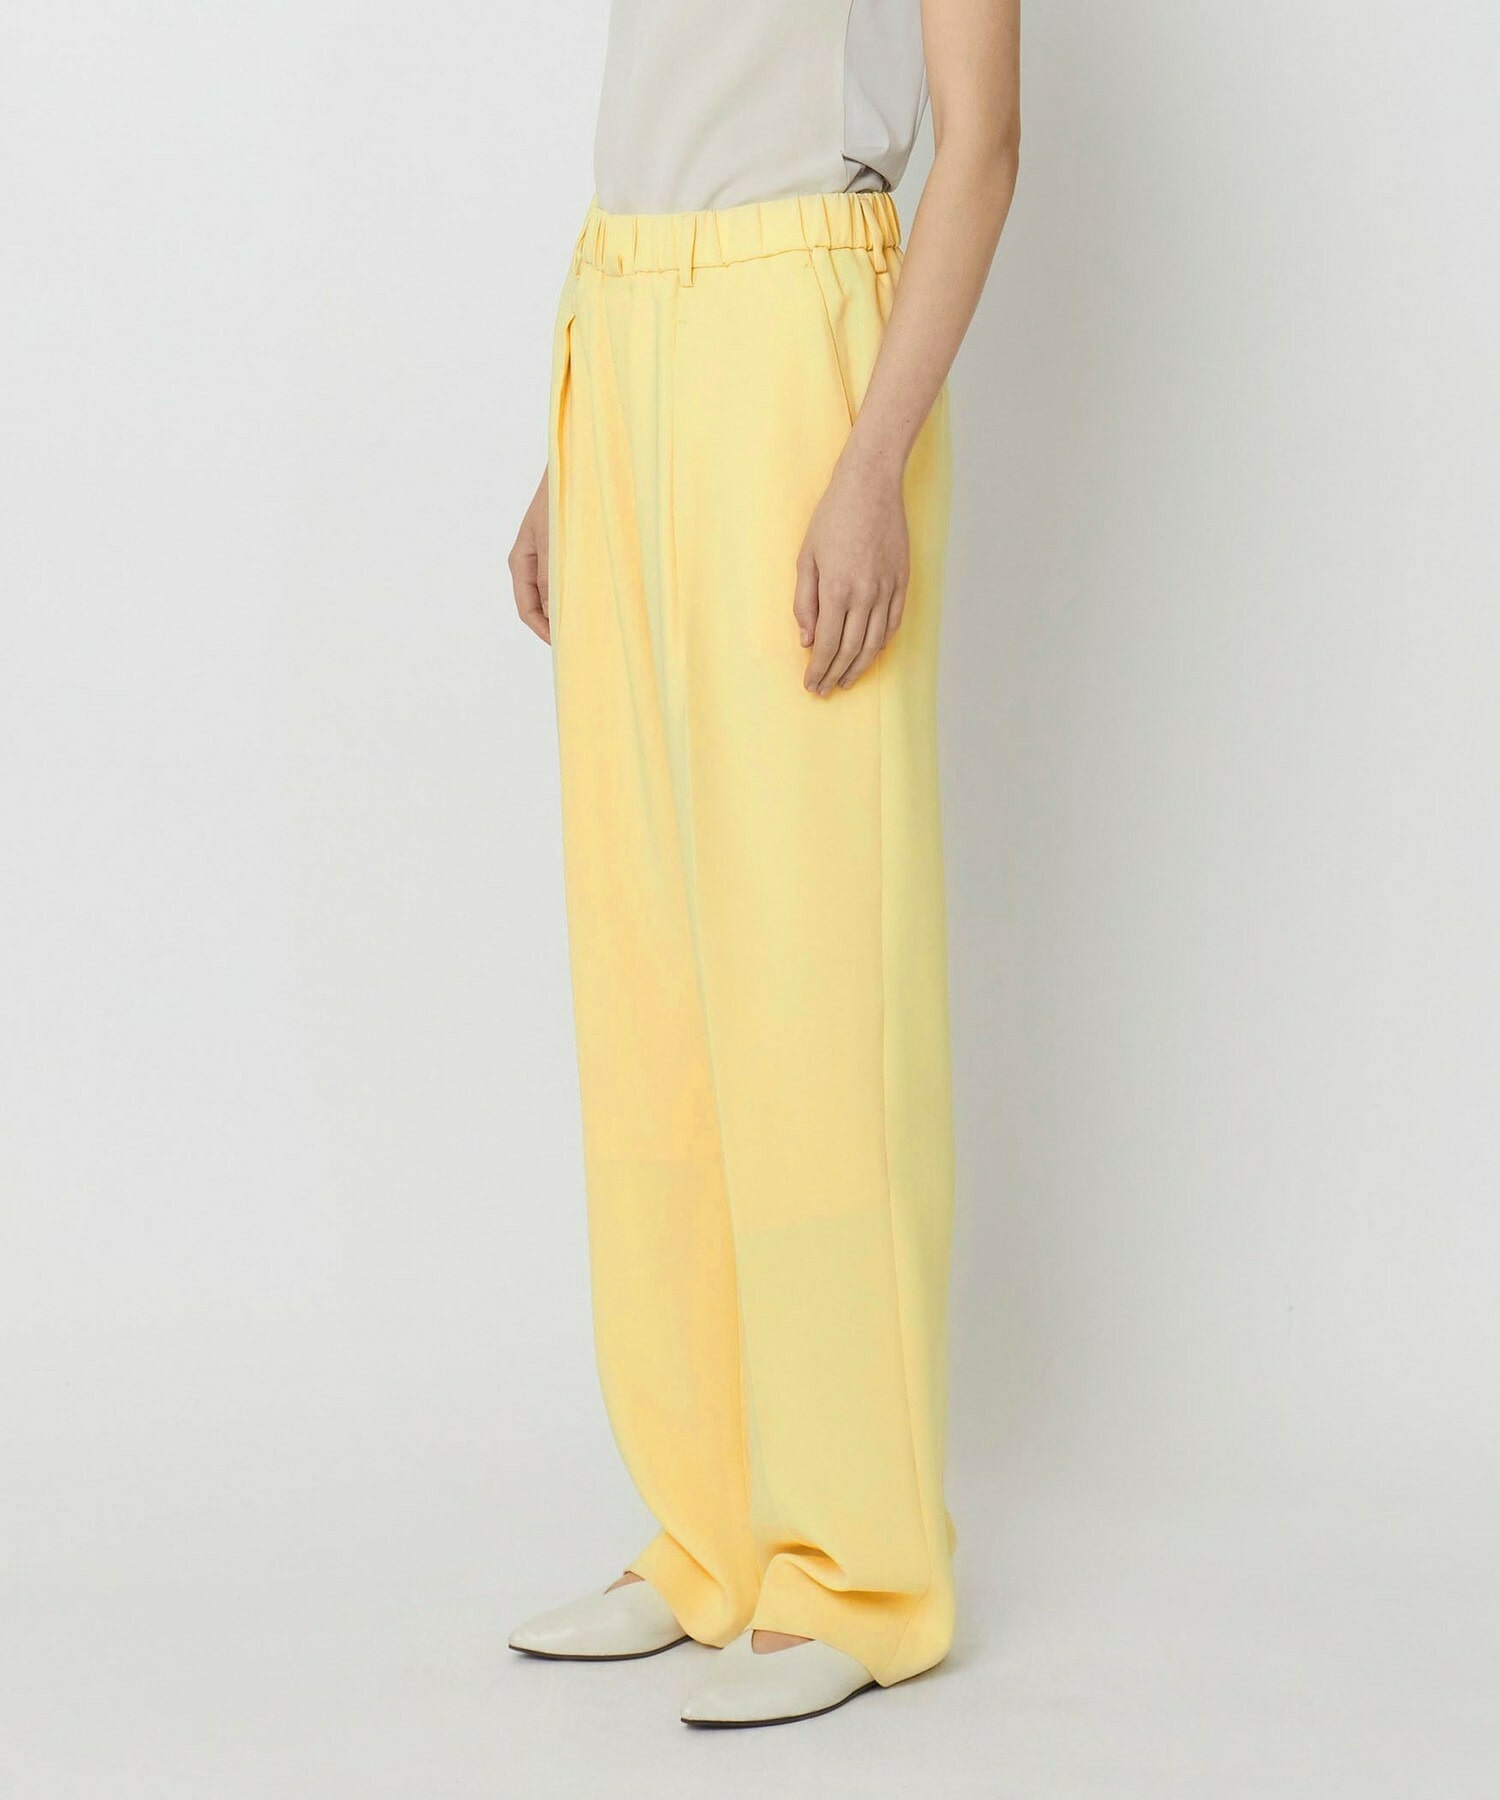 【yoshie inaba】LIGHT DOUBLE CLOTH MODERN TROUSERS W/GATHER BELT 詳細画像 ブラック 2